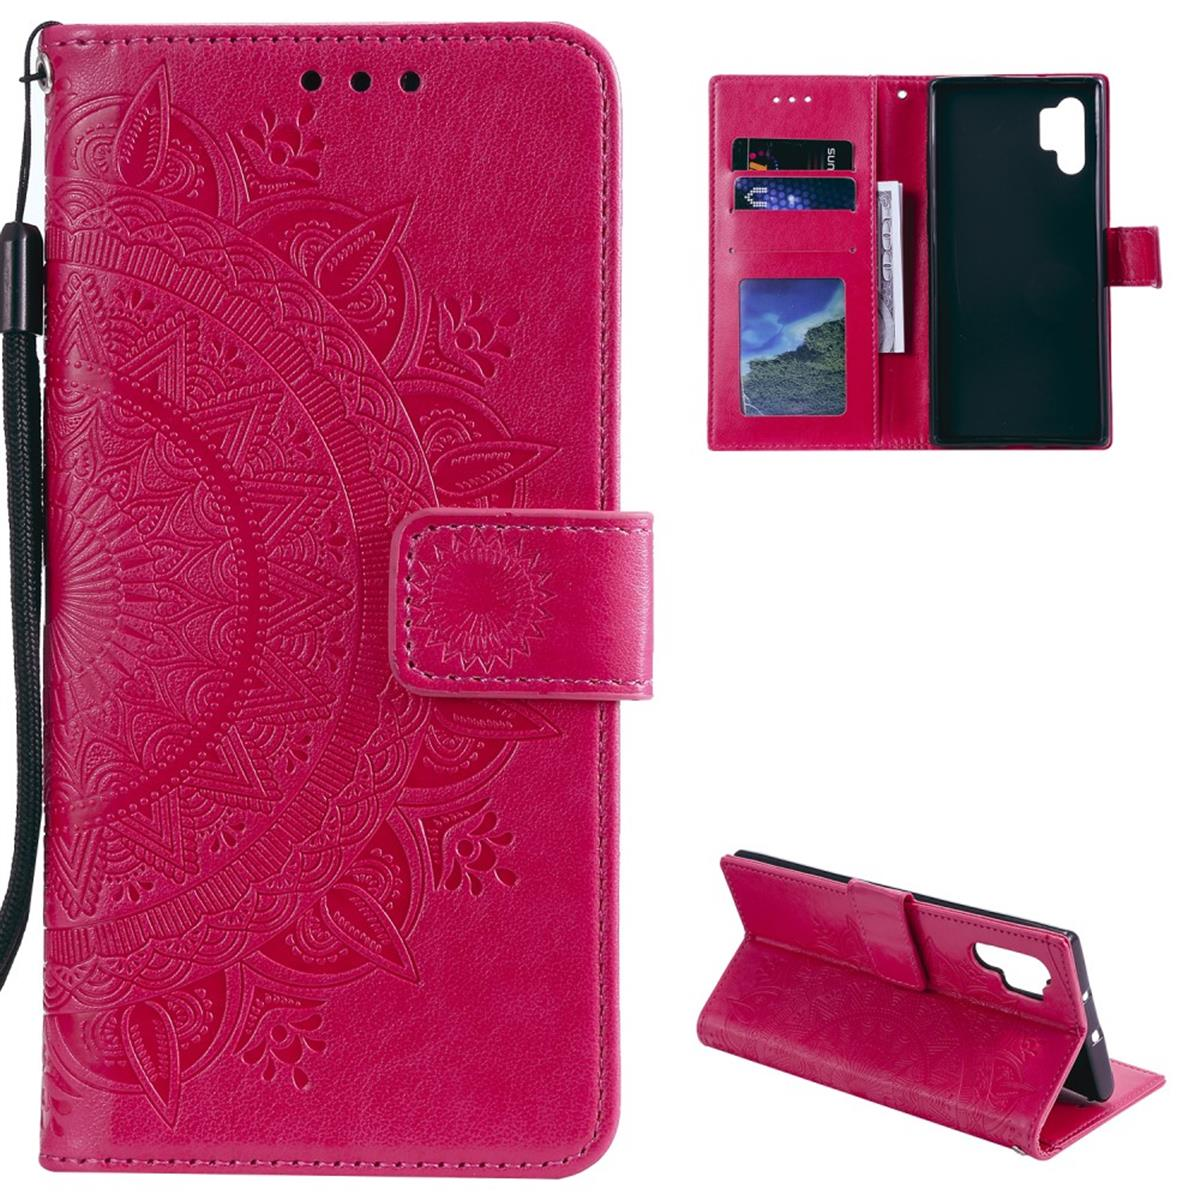 COVERKINGZ Klapphülle mit Muster, Bookcover, Pink Samsung, Mandala 4G, A32 Galaxy